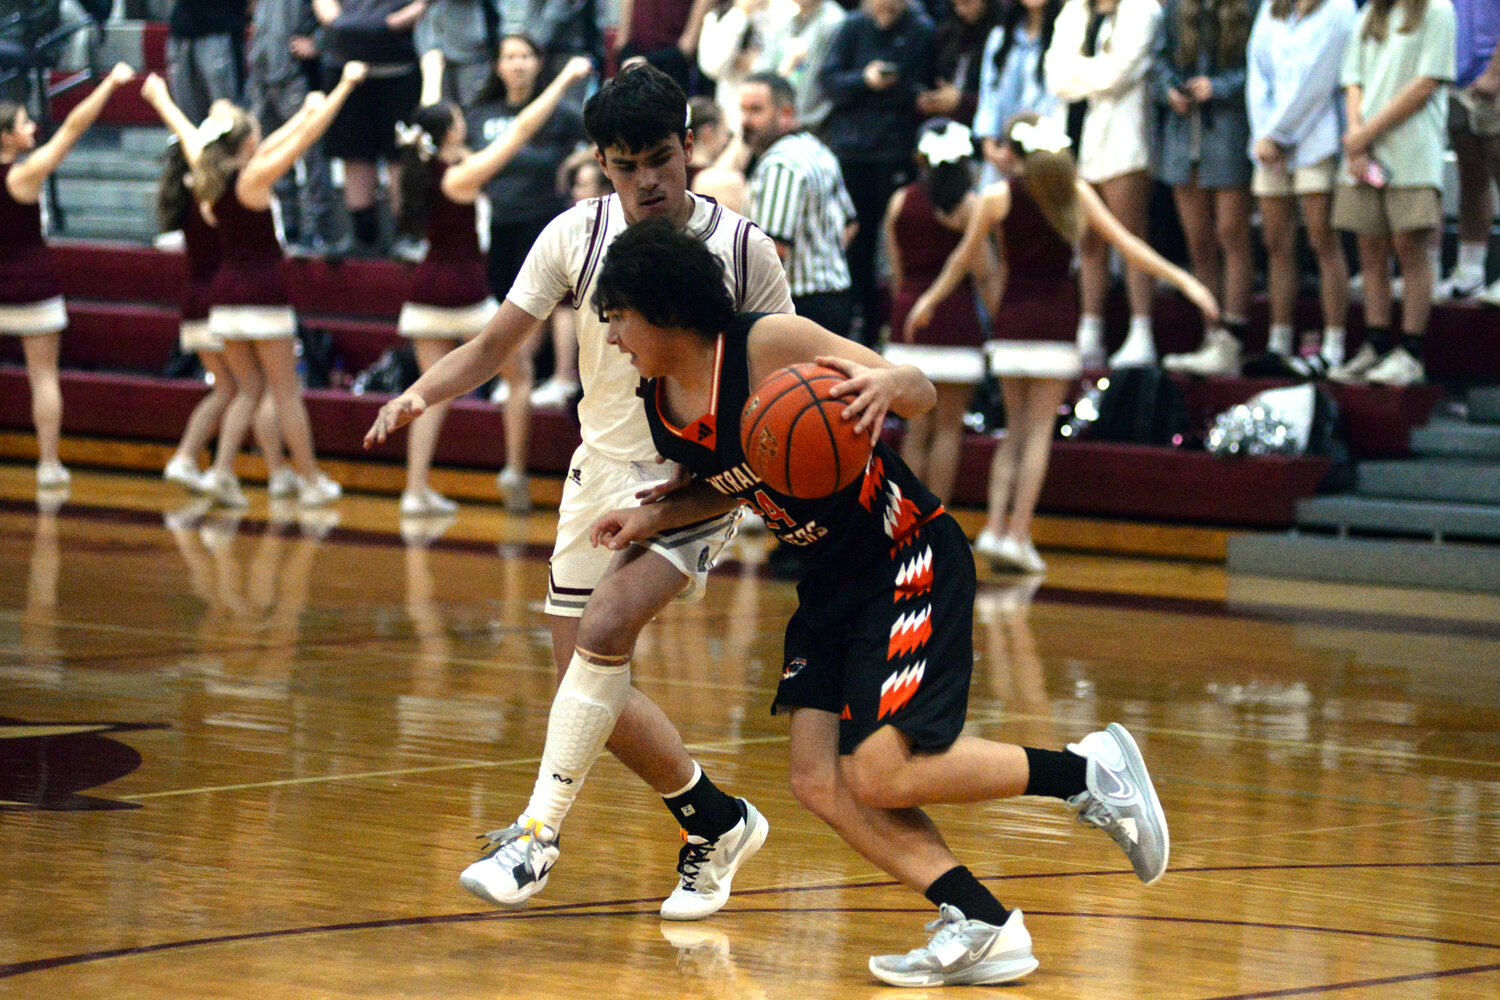 Centralia guard Jordan Yeung, right, dribbles against Montesano's Jaxson Wilson during a game at Montesano High School on Tuesday.